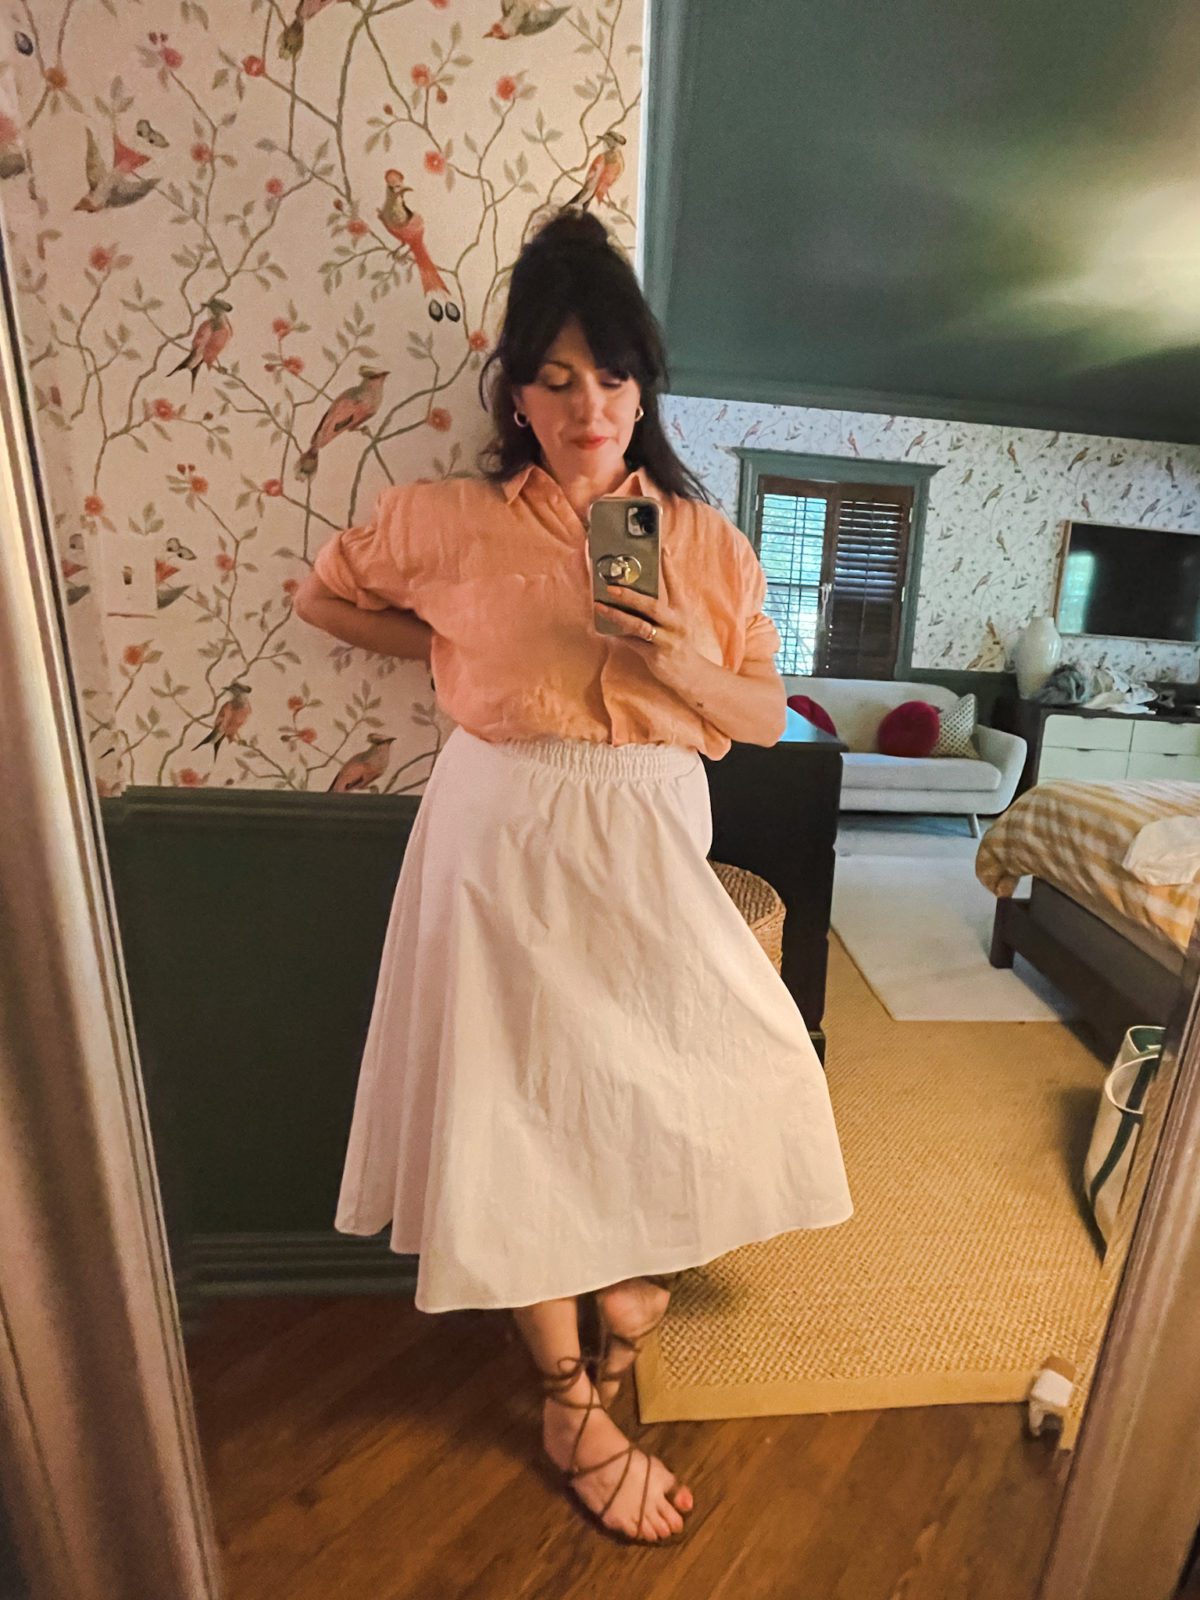 5 of My Favorite Outfits From June That Made Getting Dressed FUN